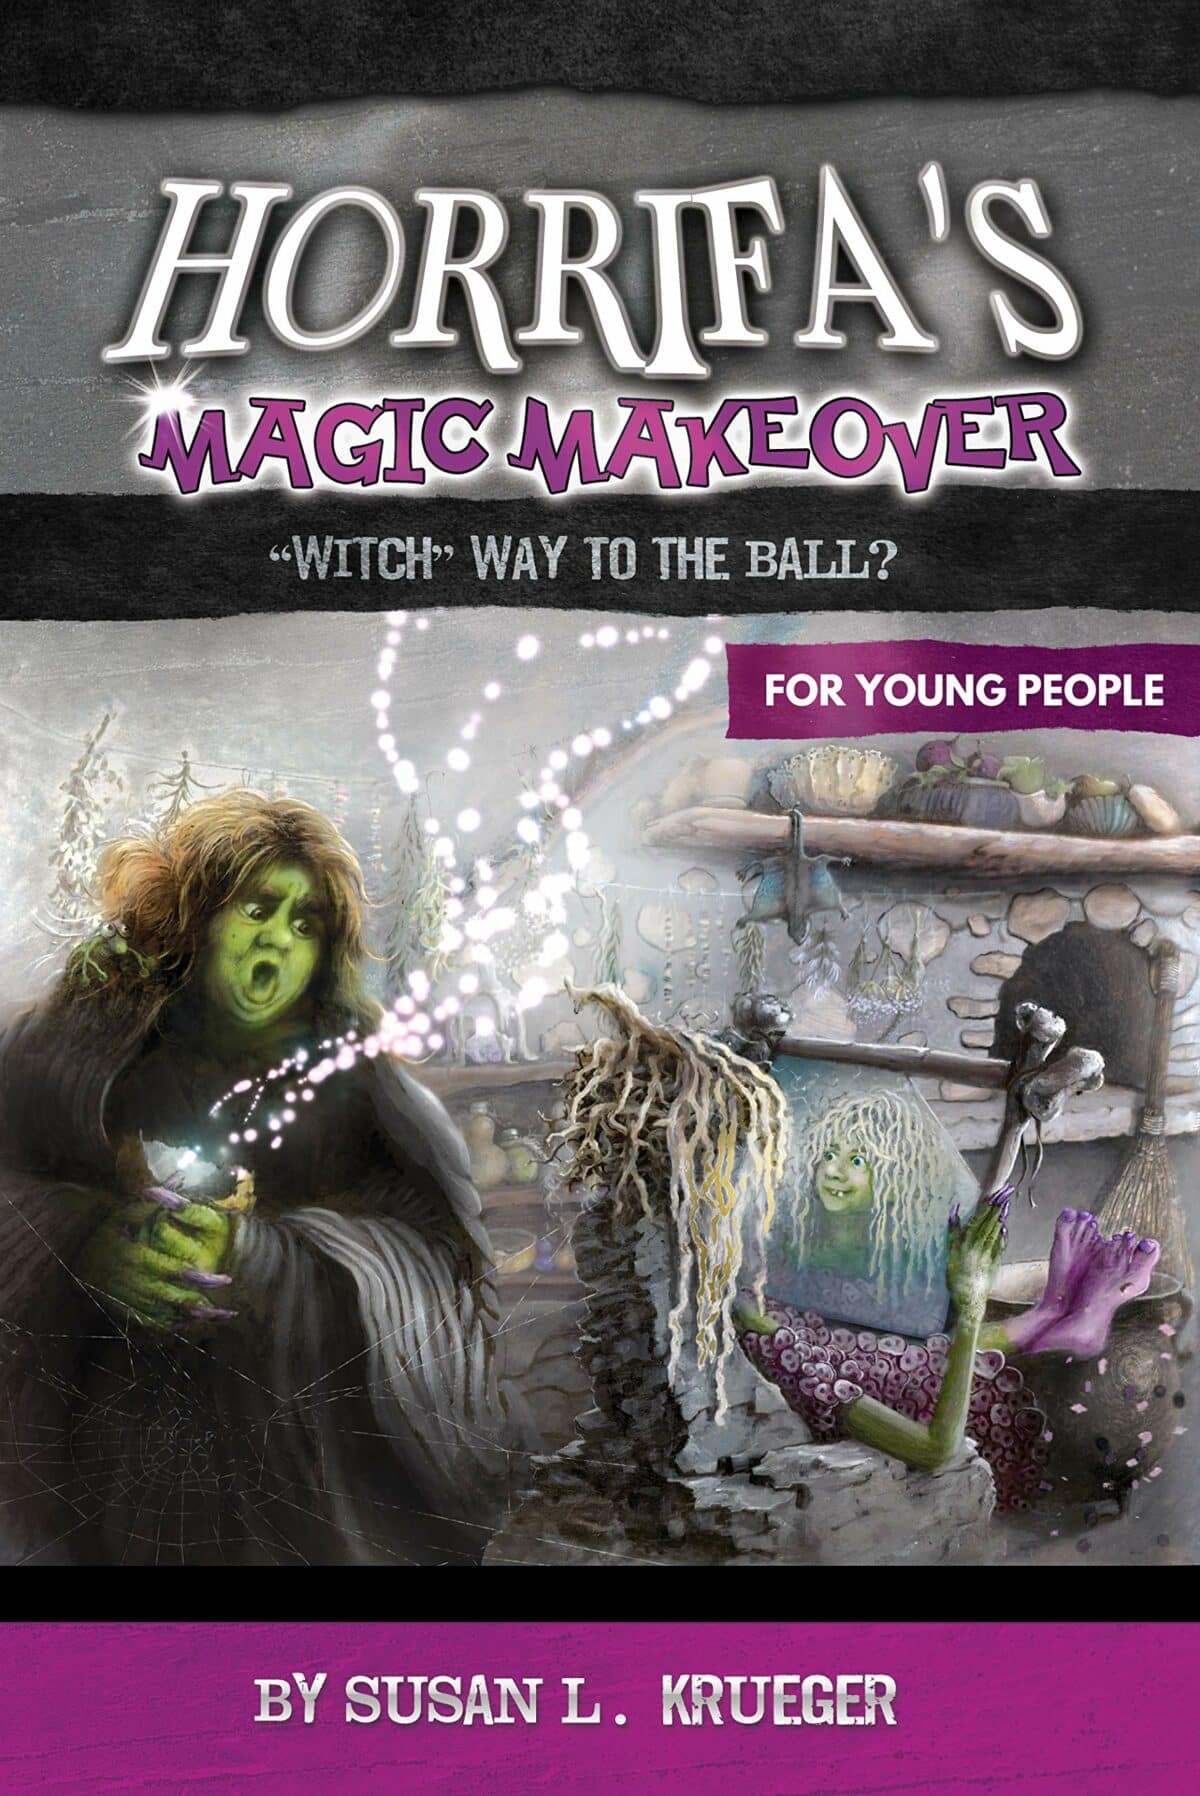 Book cover: Horrifa's Magic Makeover: "Witch" Way to the Ball? Book cover